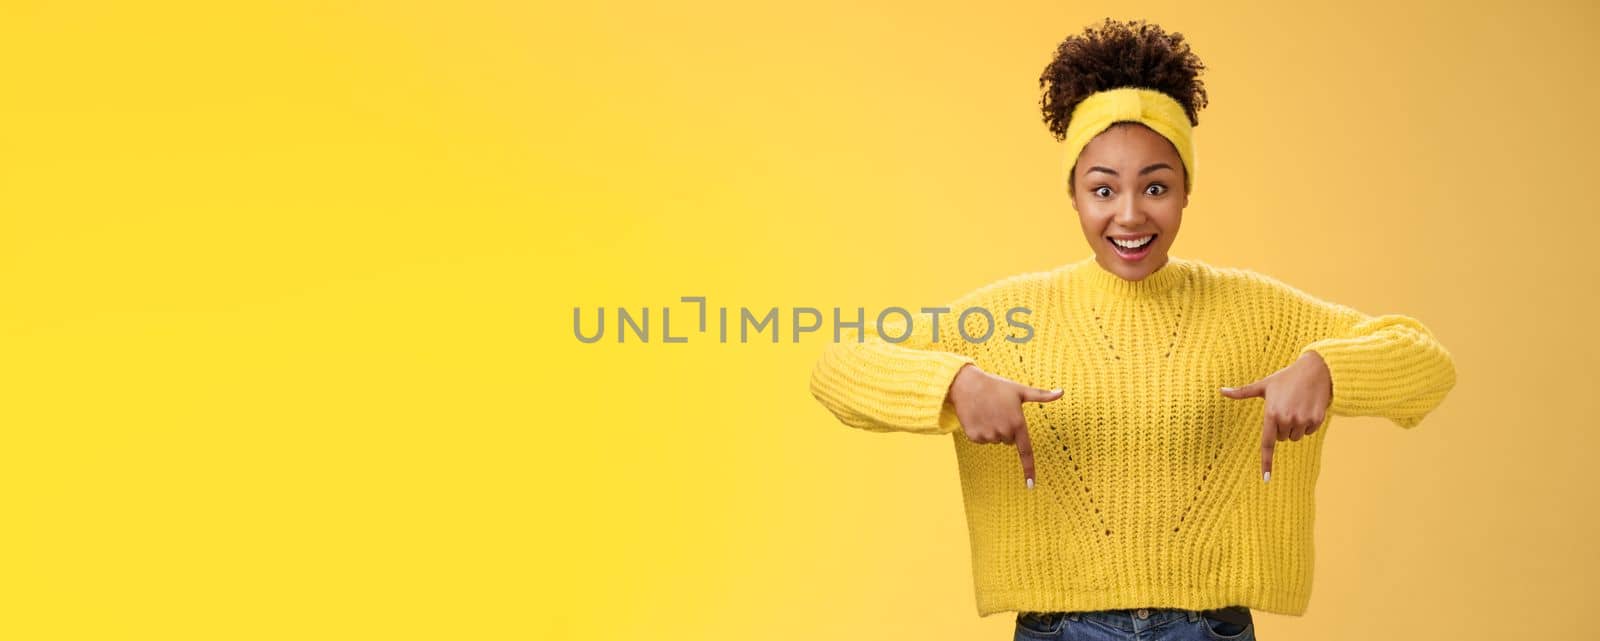 Enthusiastic impressed surprised beautiful african-american woman widen eyes drop jaw smiling gasping astonished pointing down amused standing yellow background showing amazing opportunity.